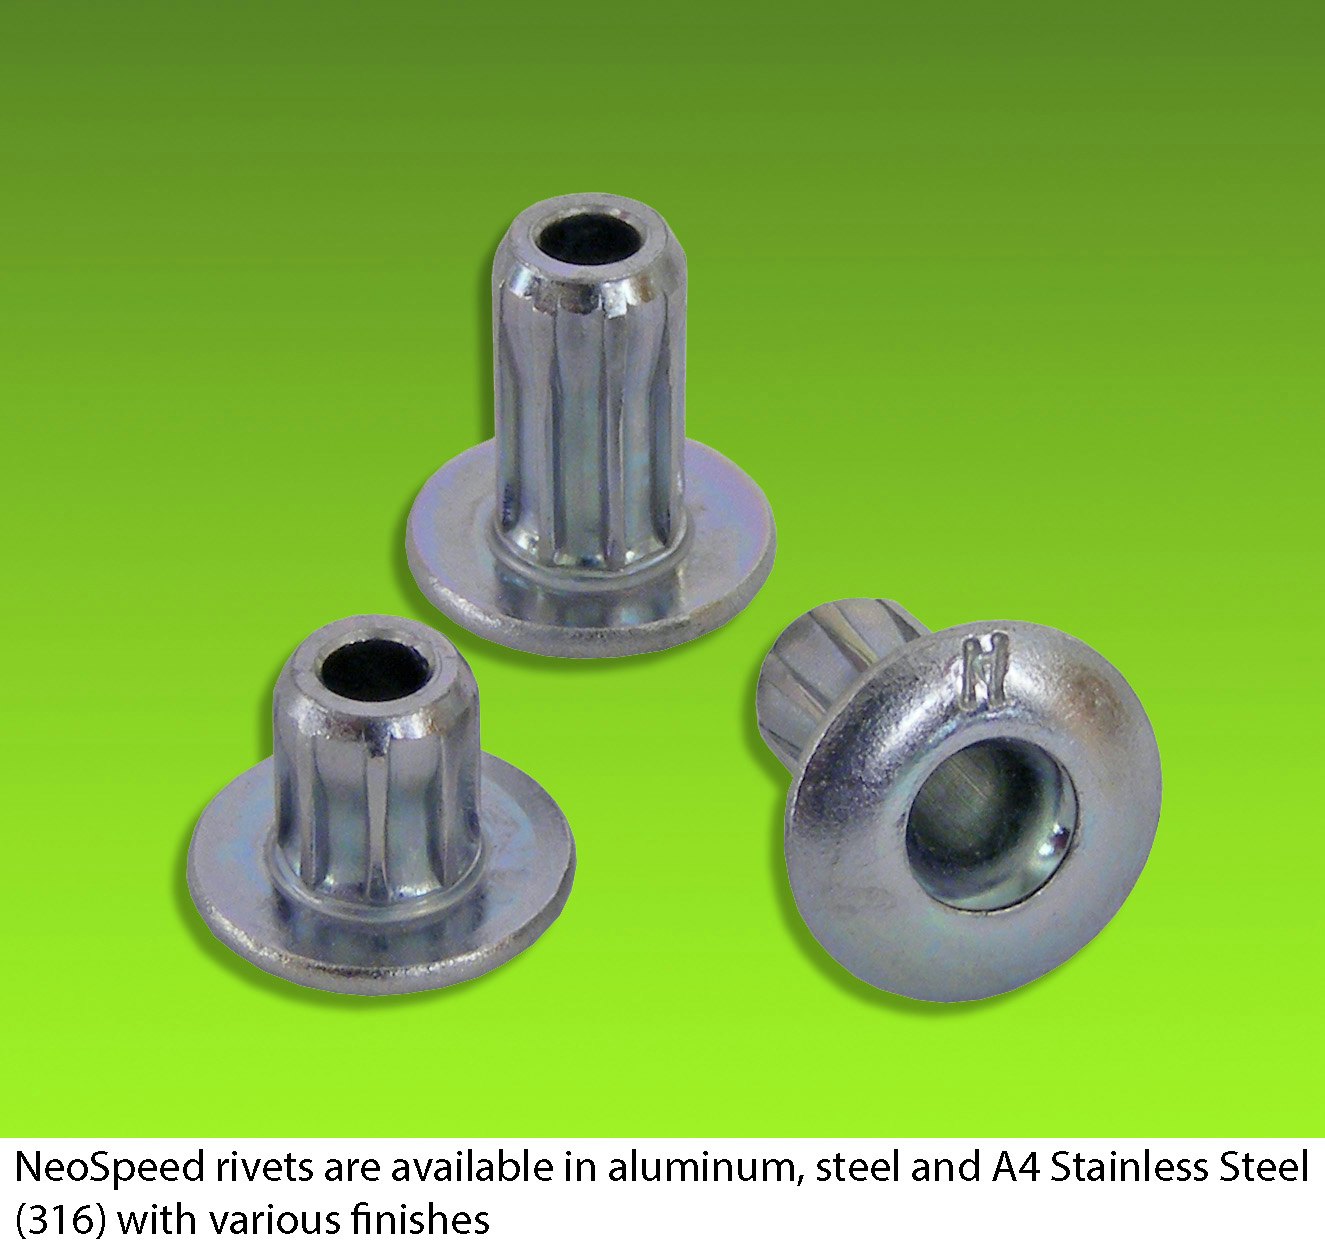 Avdel - A business division of STANLEY Engineered Fastening